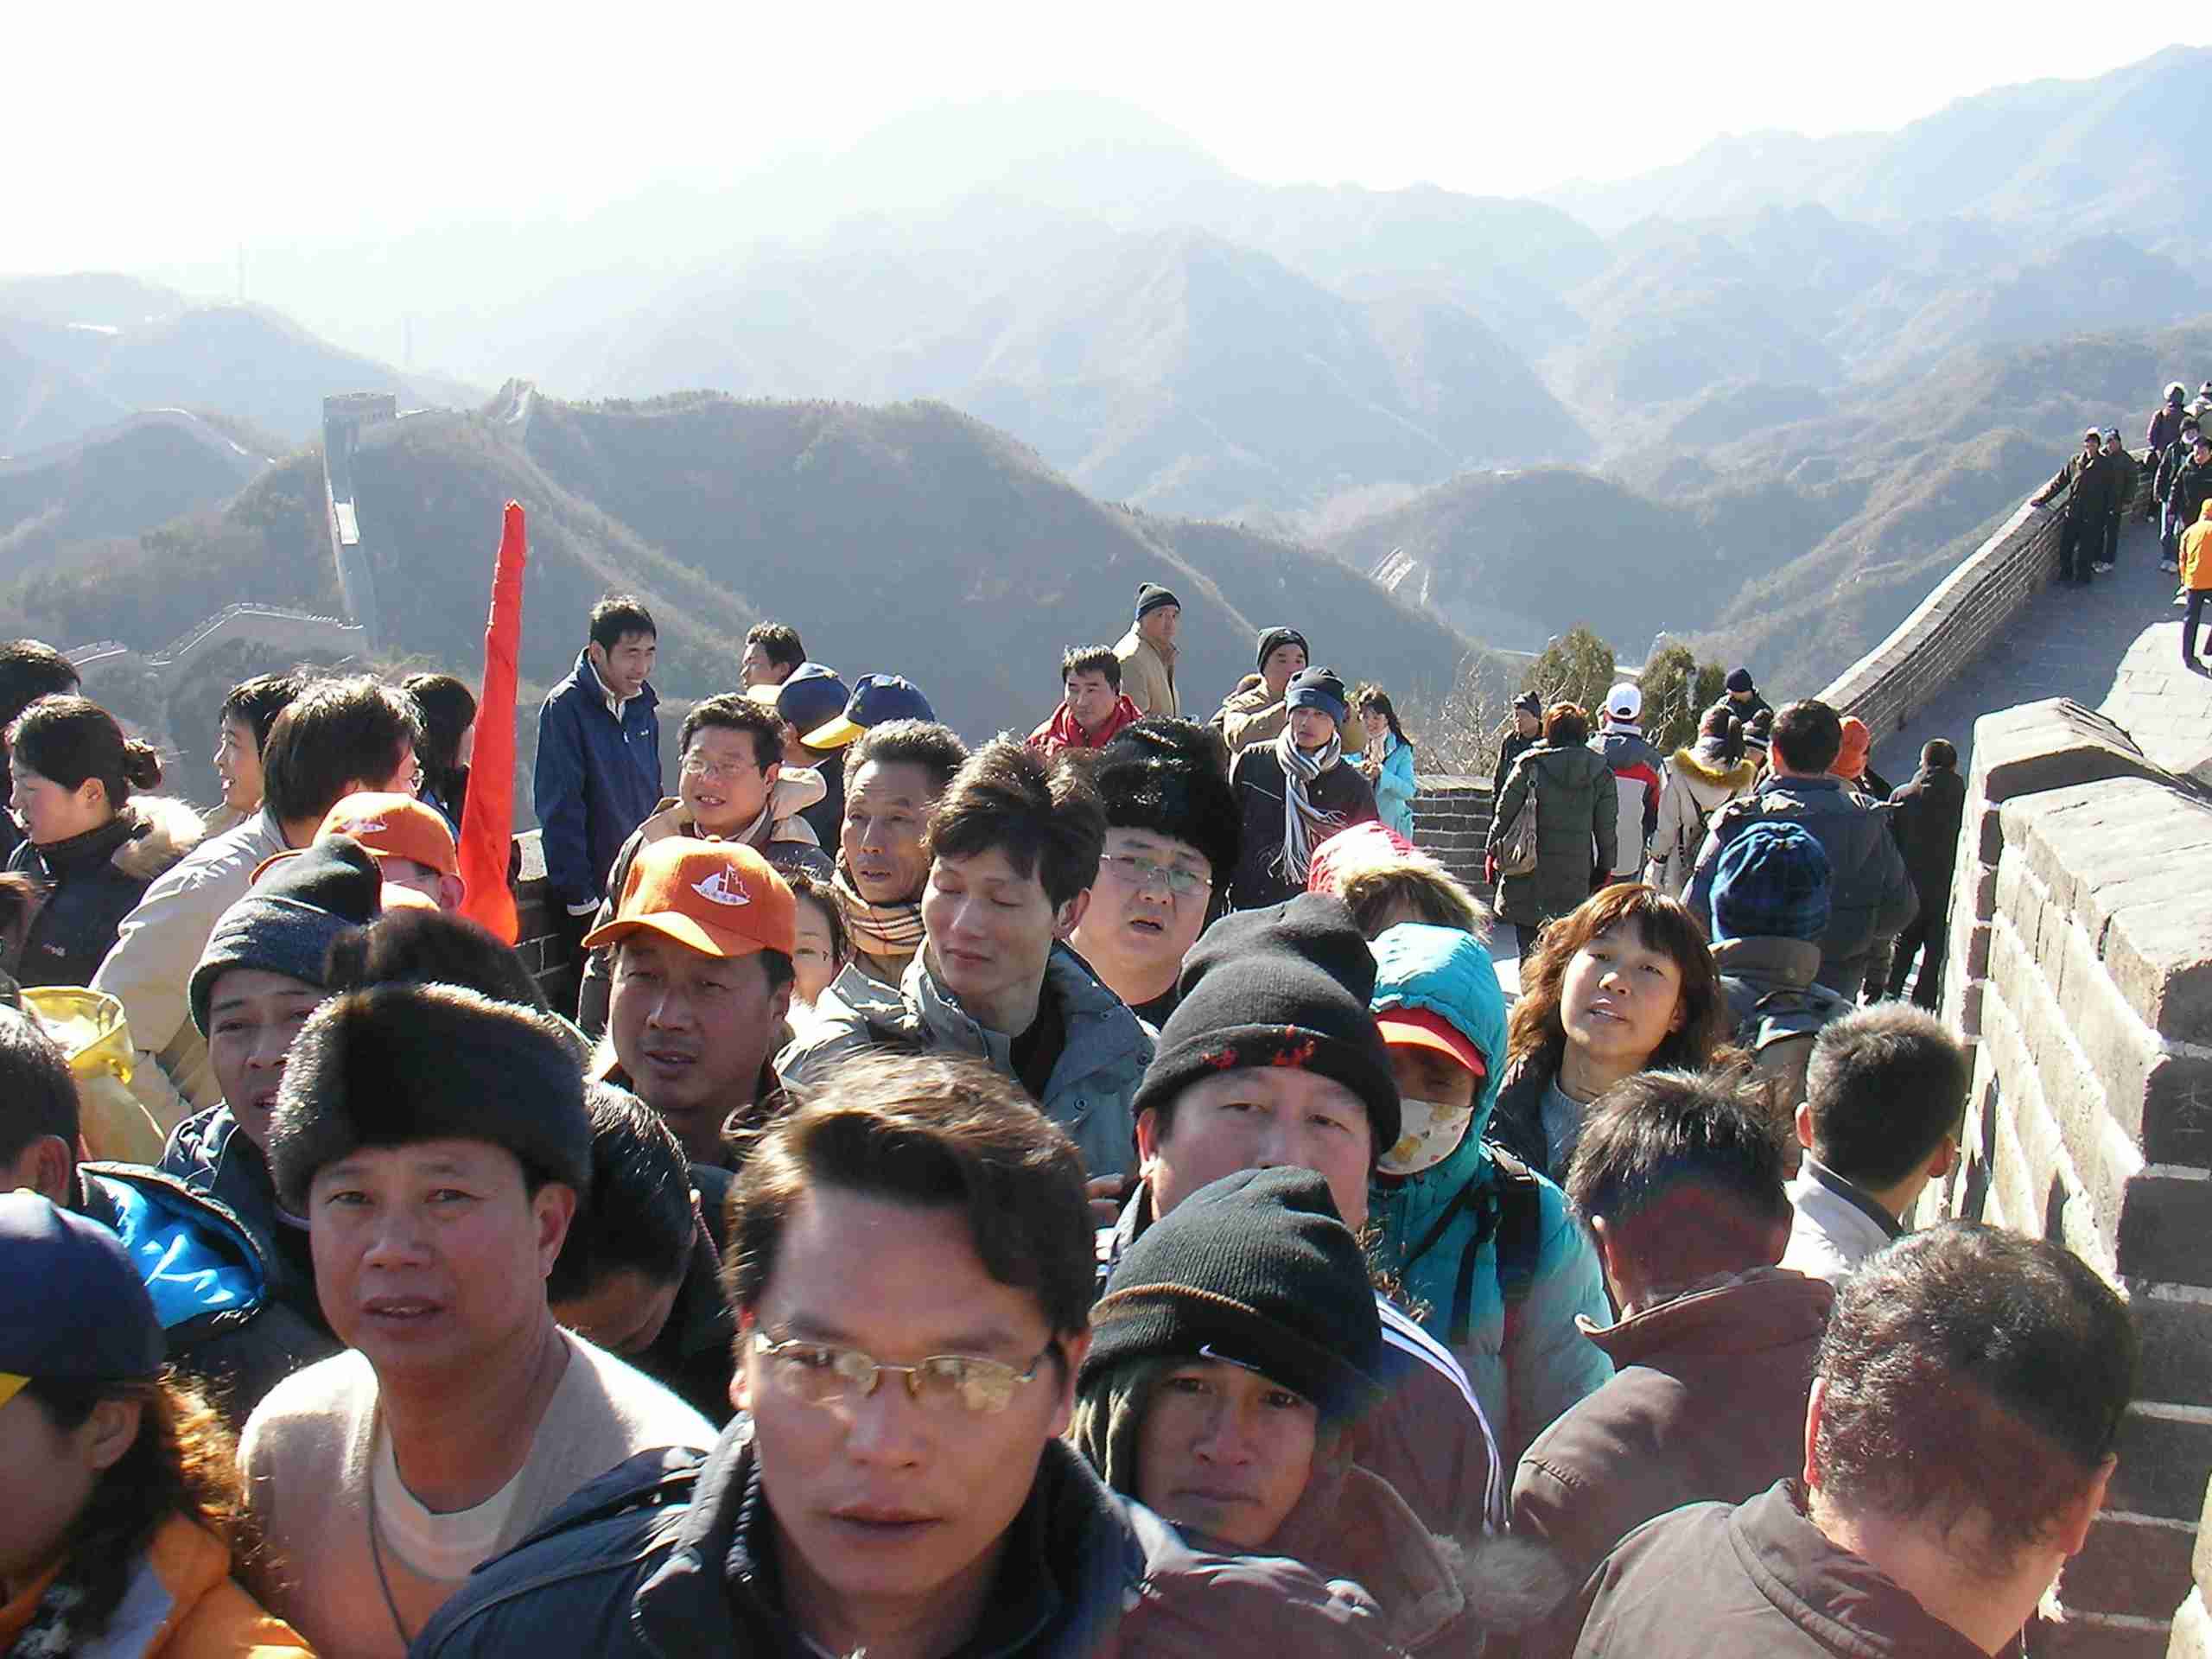 Beijing Badaling Great Wall crowds scaled